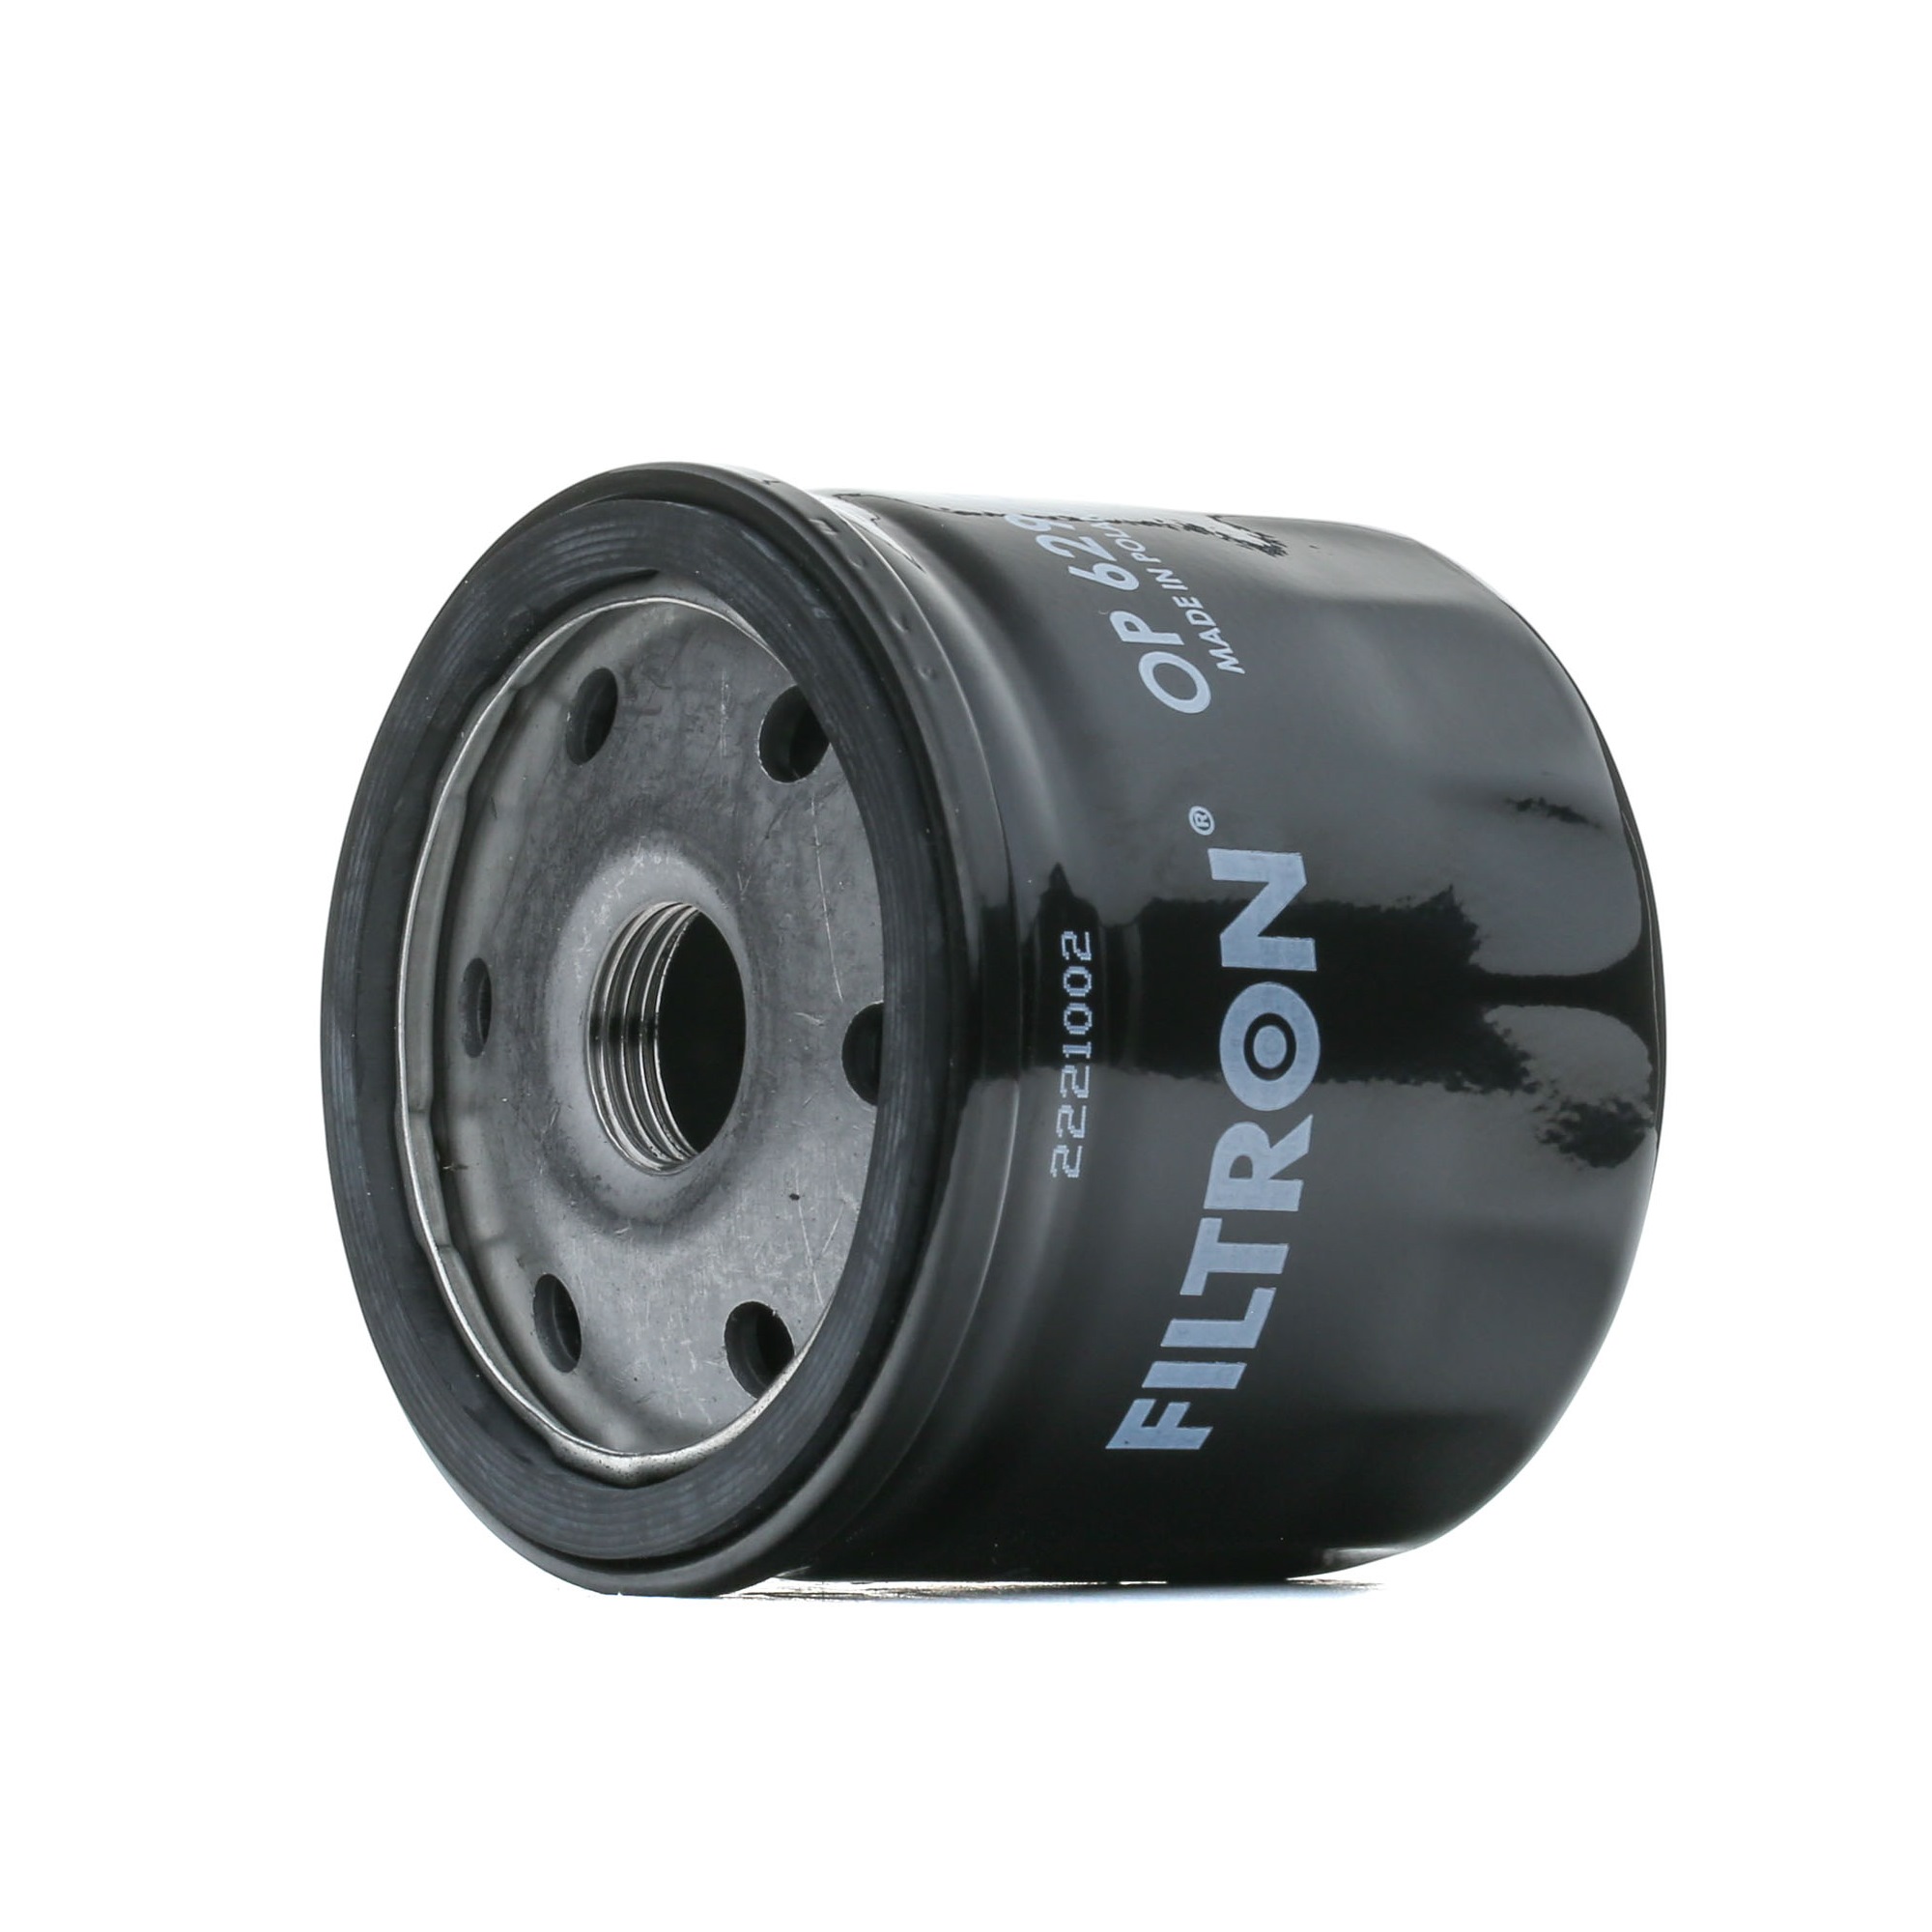 FILTRON OP 629/3 Oil filter 3/4-16 UNF-2B, Spin-on Filter